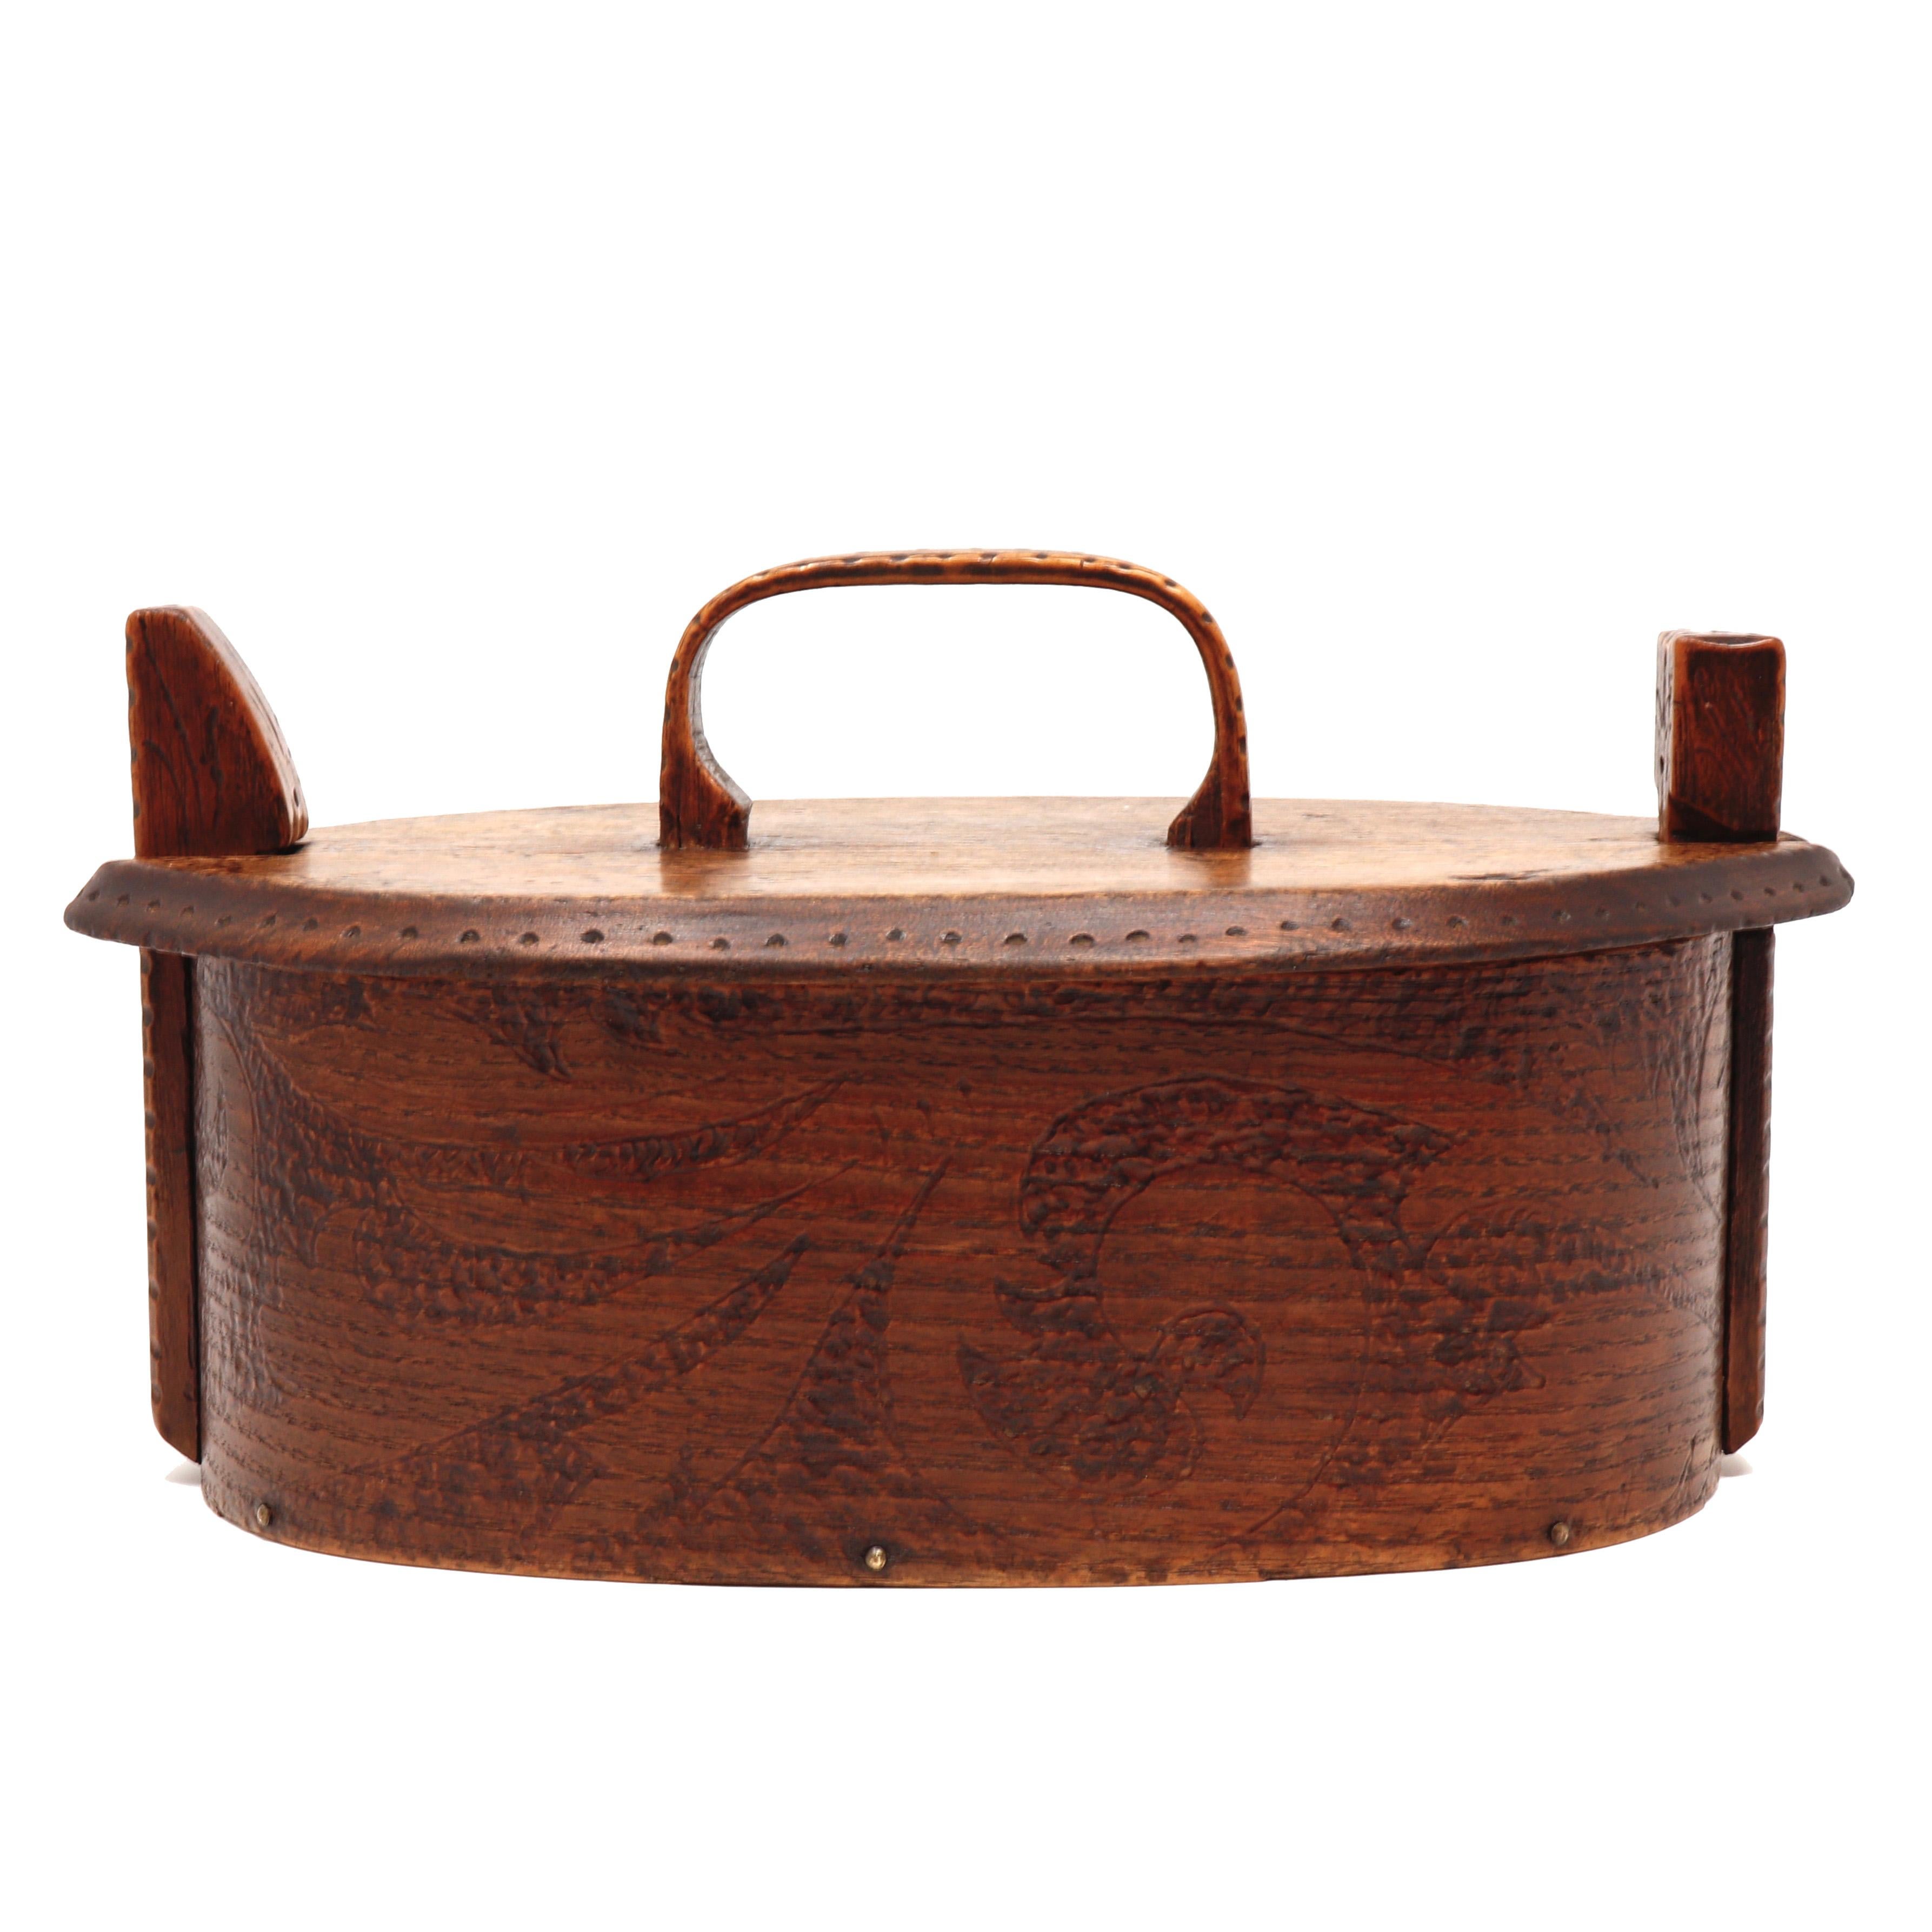 A lidded wooden basket, the sides from one piece of thin steamed wood tacked together with brass brads at the centre of one side and beveled decorative seam, flat wood bottom and flat wooden top and handle that locks into place by the design of the